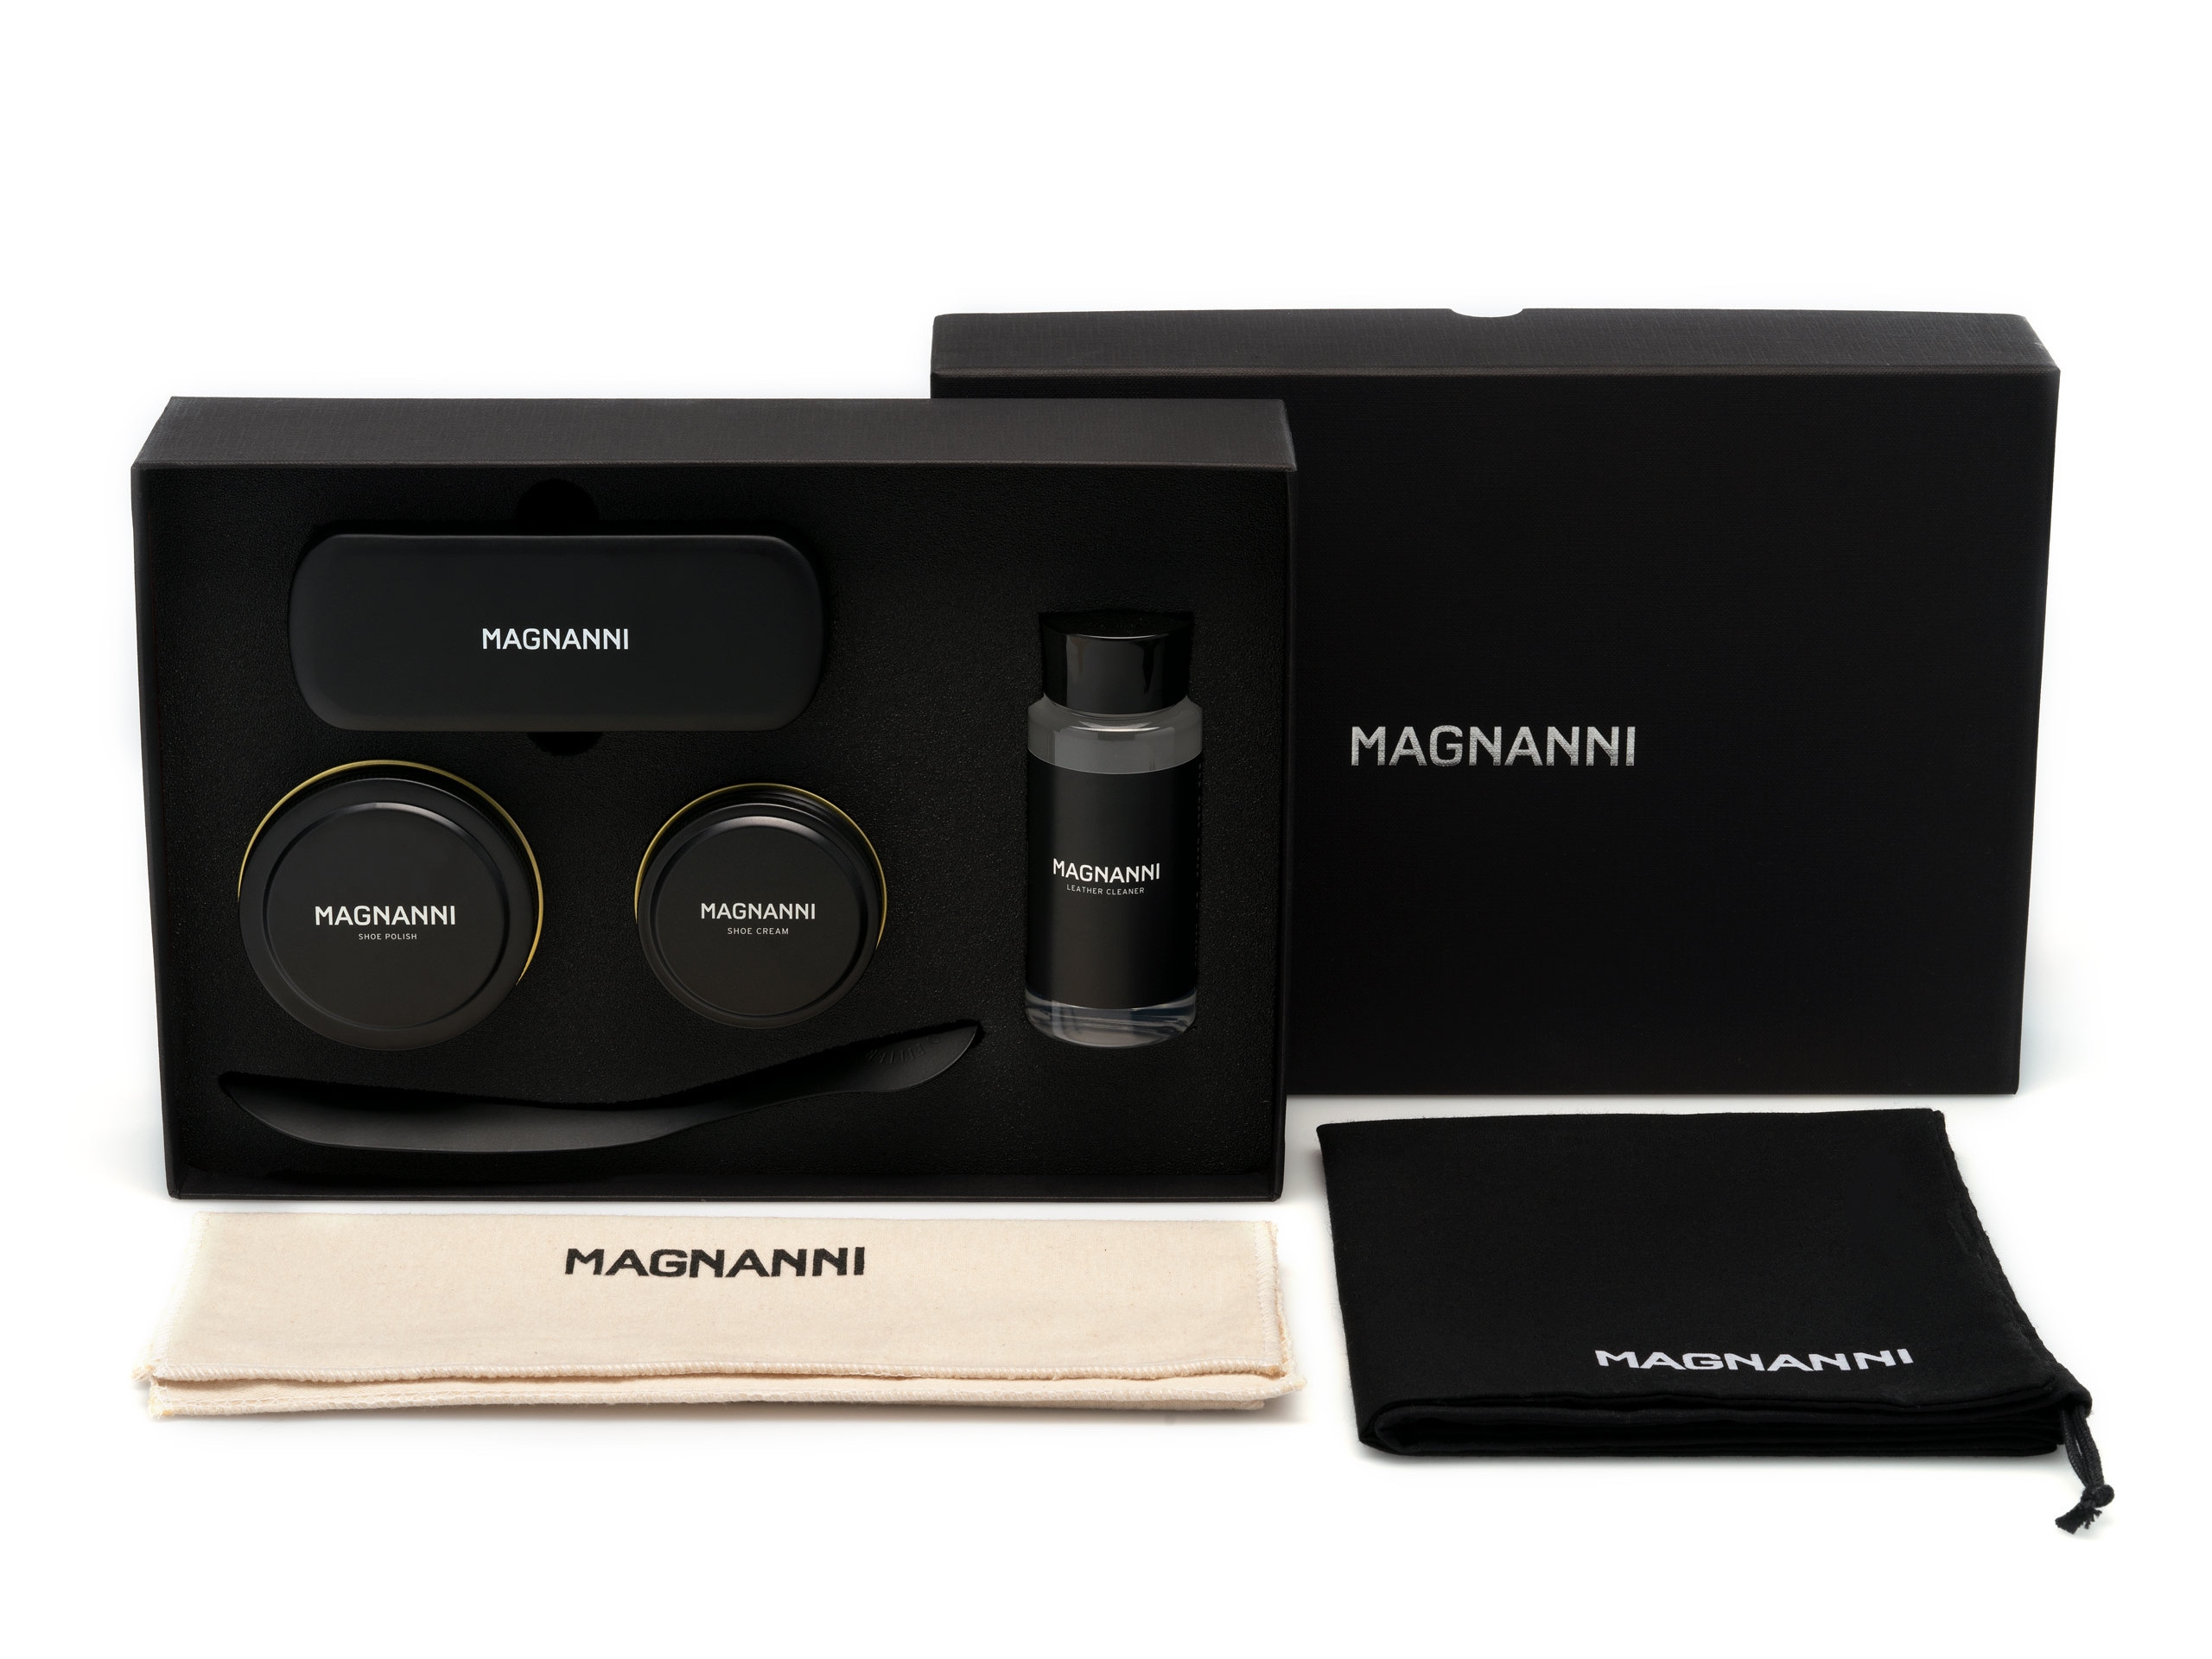 Caring for Shoes: Magnanni Shoe Care Products